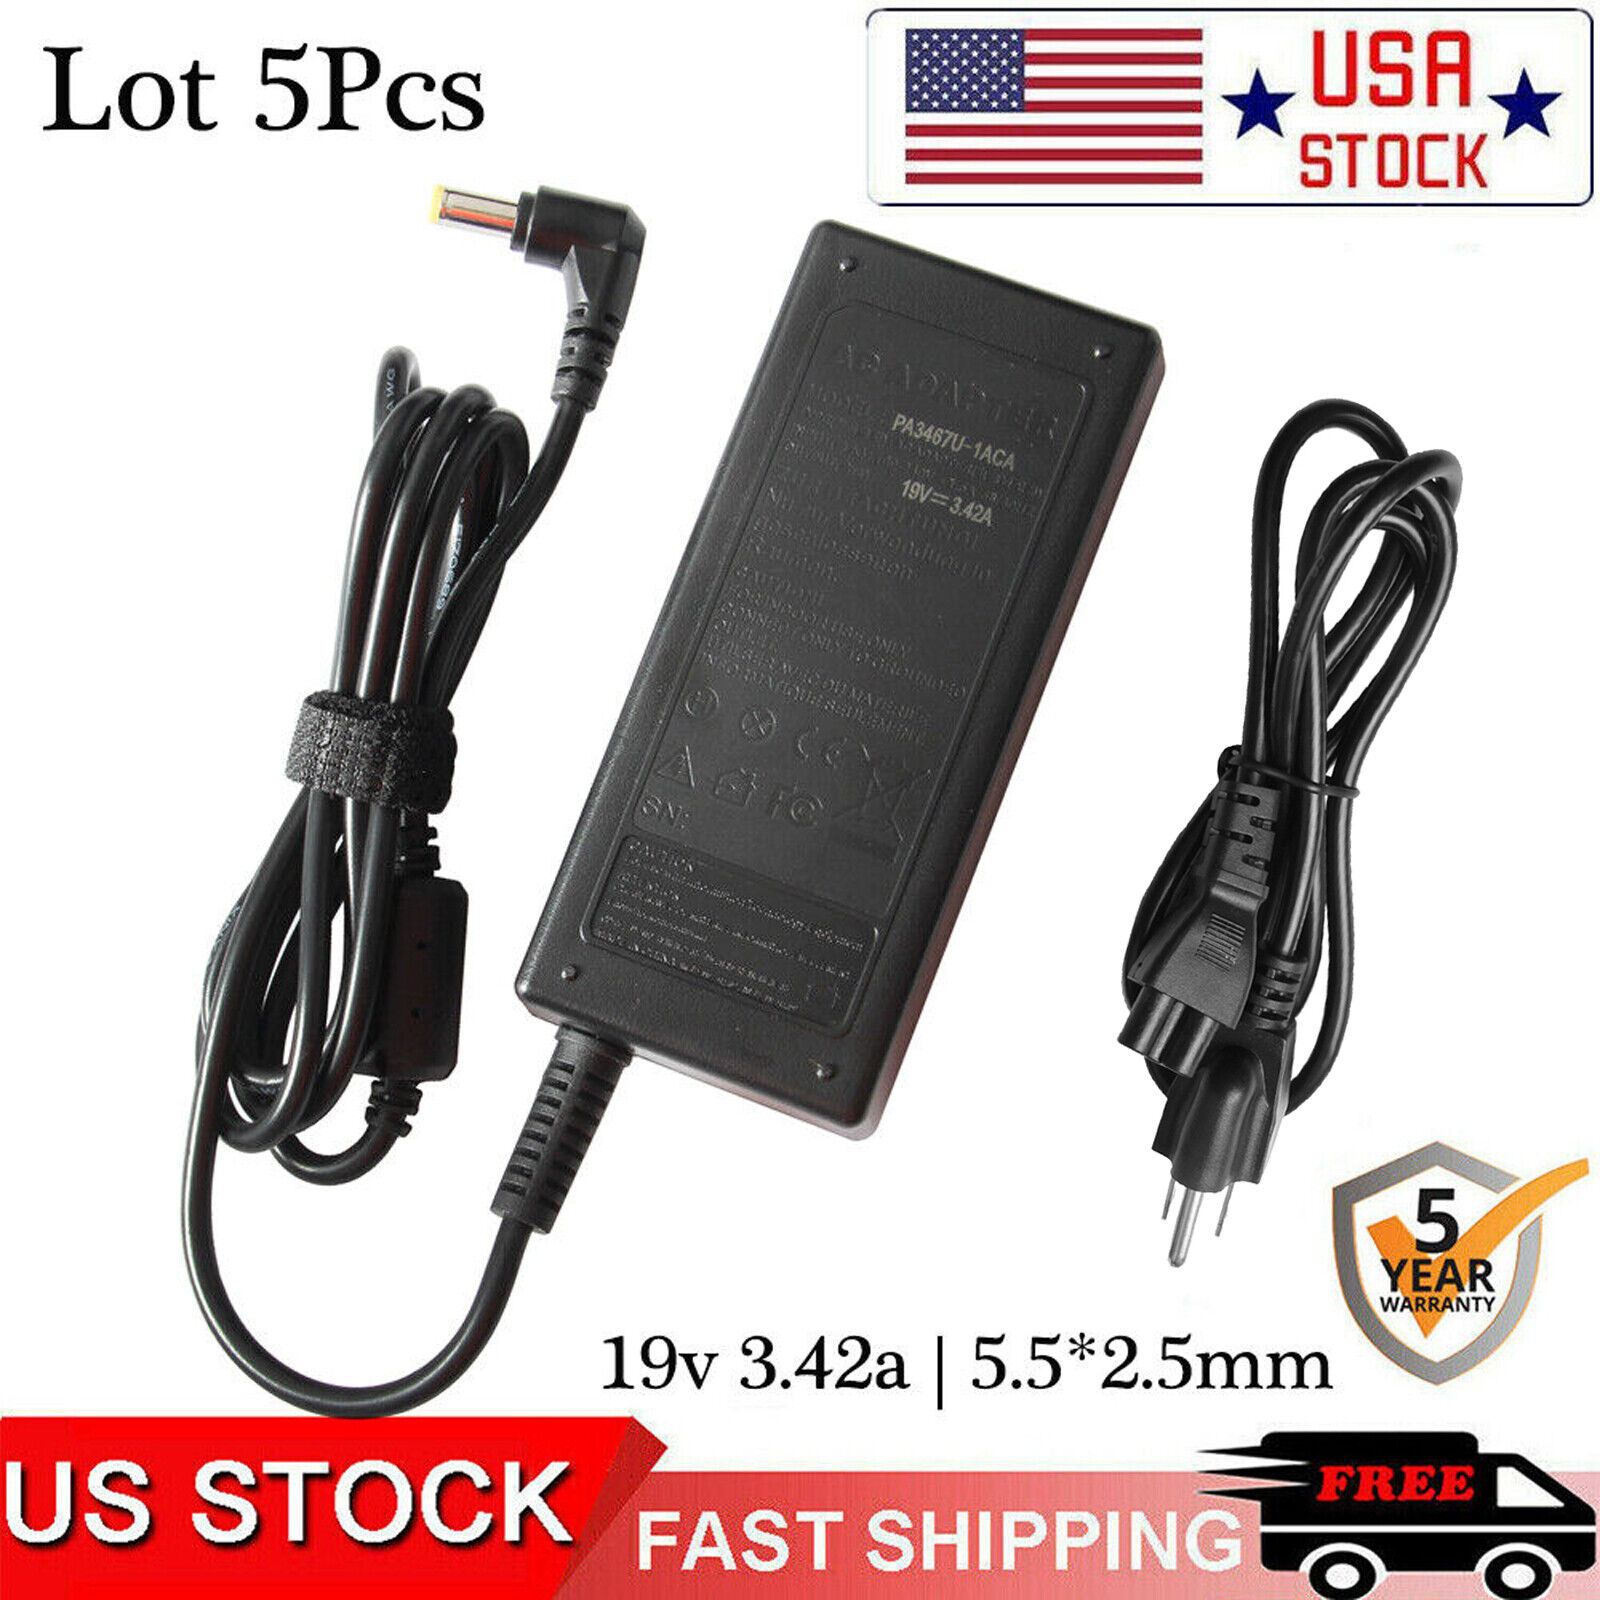 Lot 5Pcs AC Adapter Charger For Toshiba Laptop Power Supply 19V 3.42A 65W Fast